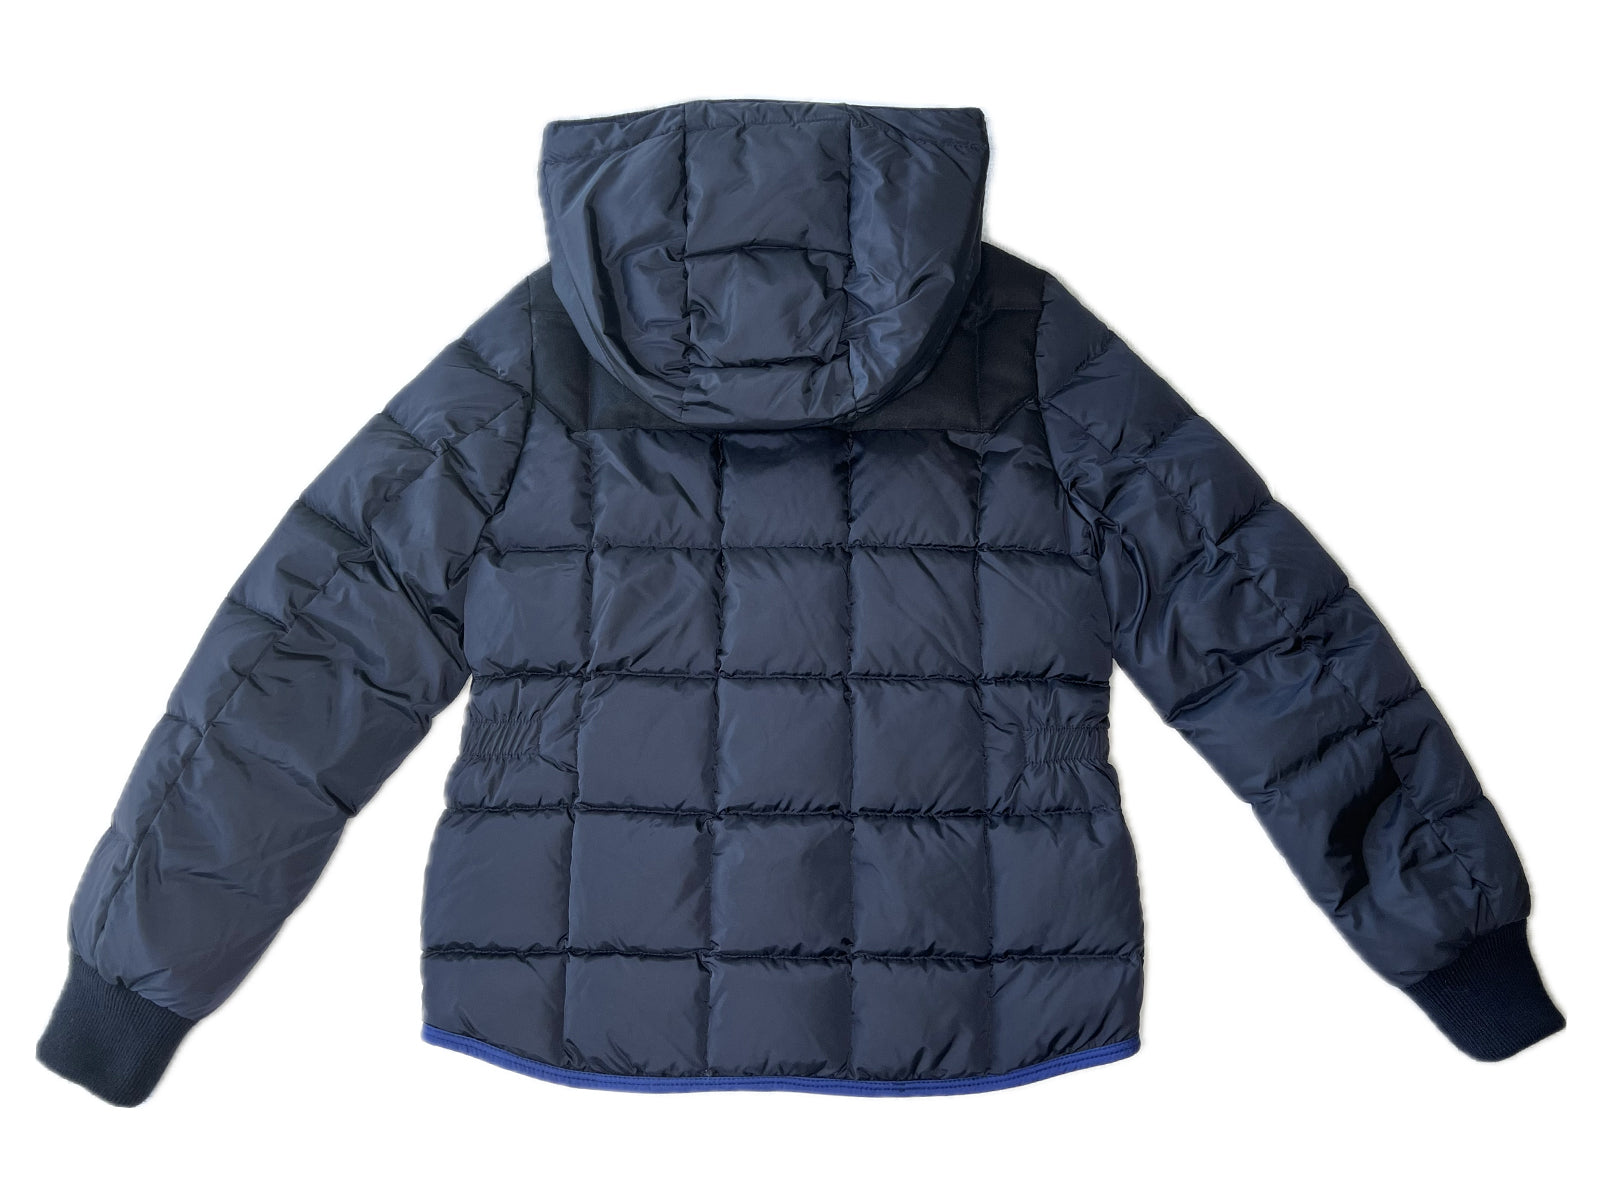 Brand New! Kids Blue Monclerr jacket with detachable hood and pockets.